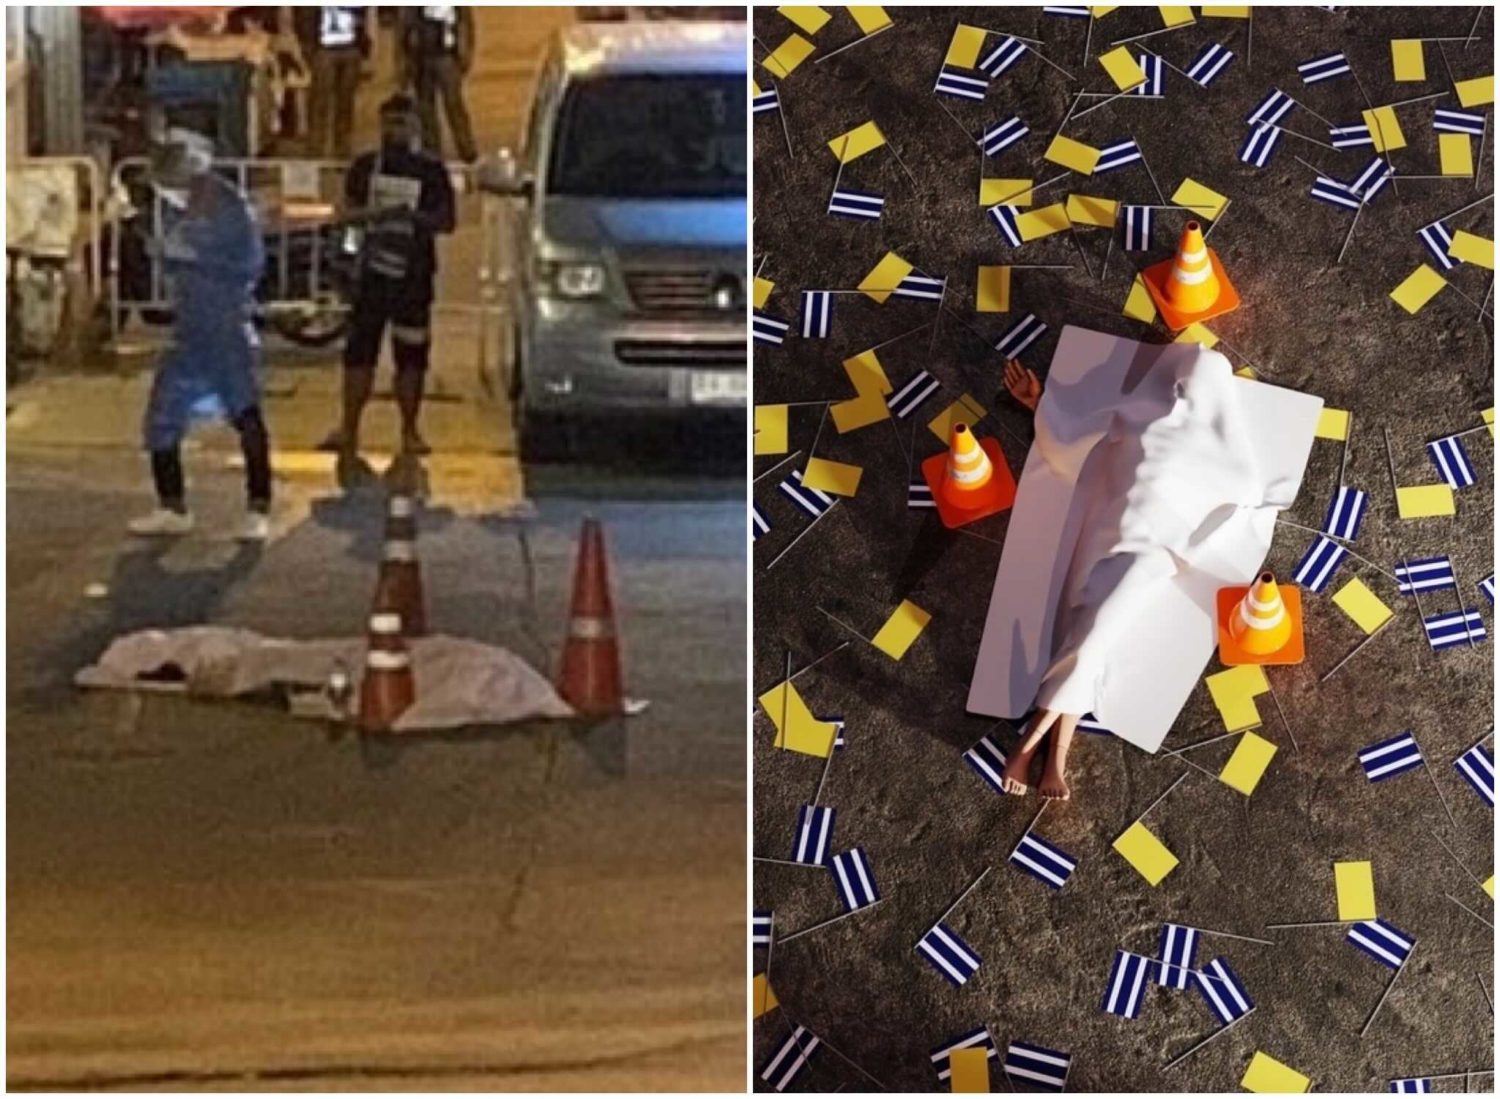 A file photo of a body left in front of Wat Bowonniwet in Bangkok’s Phra Nakhon district on Tuesday night, at left, and an illustration by Uninspired by Current Events, at right.